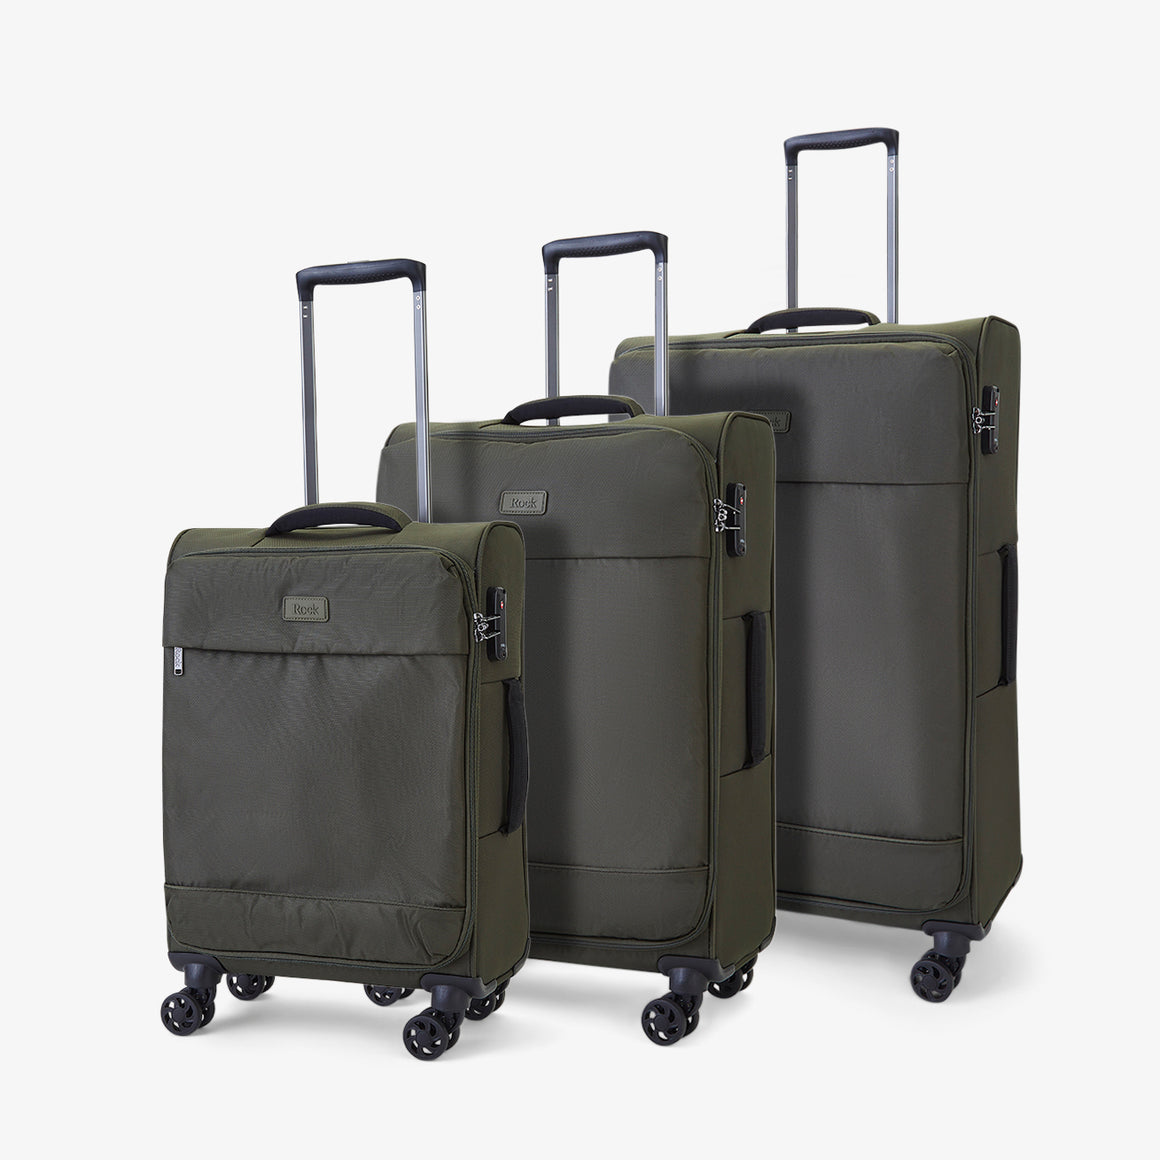 Paris Set of 3 Suitcases in Olive Green